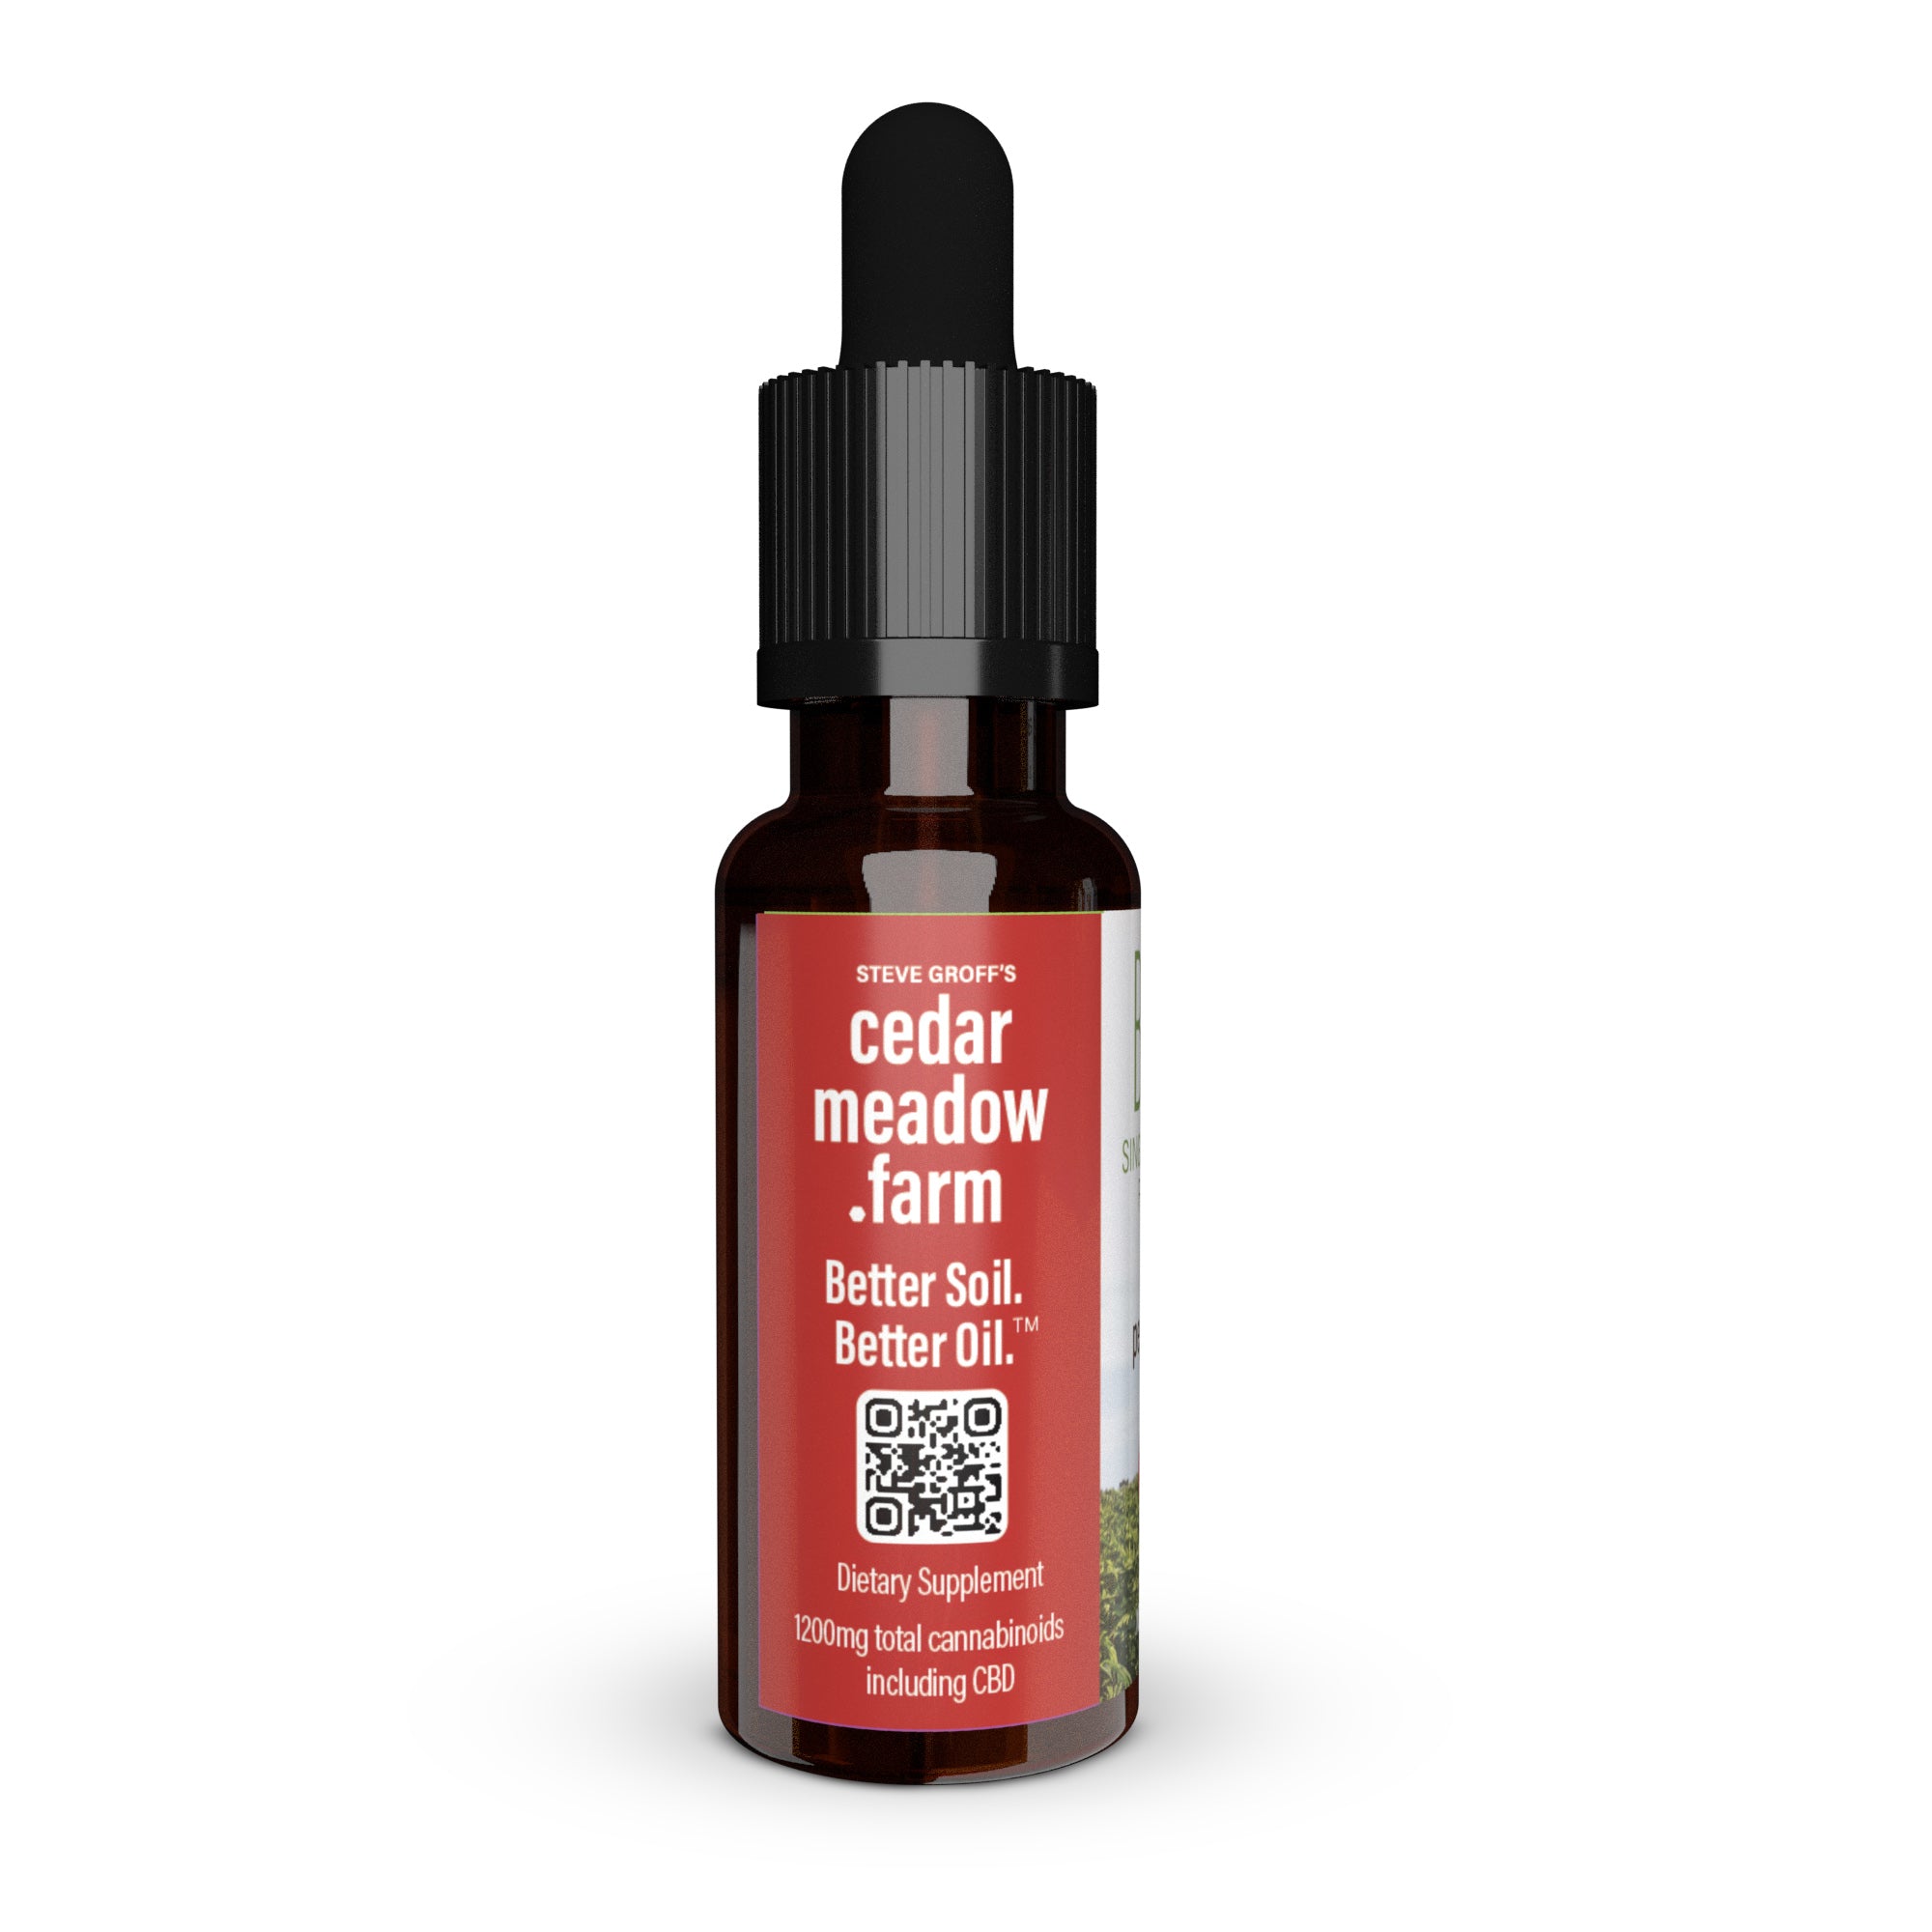 CBD Oil Peppermint Flavor-A crisp new look for the same incredible oil that you've come to love!We made BETTER just for you. Full Spectrum: All of the naturally-occurring compounds in the -Cedar Meadow Farm